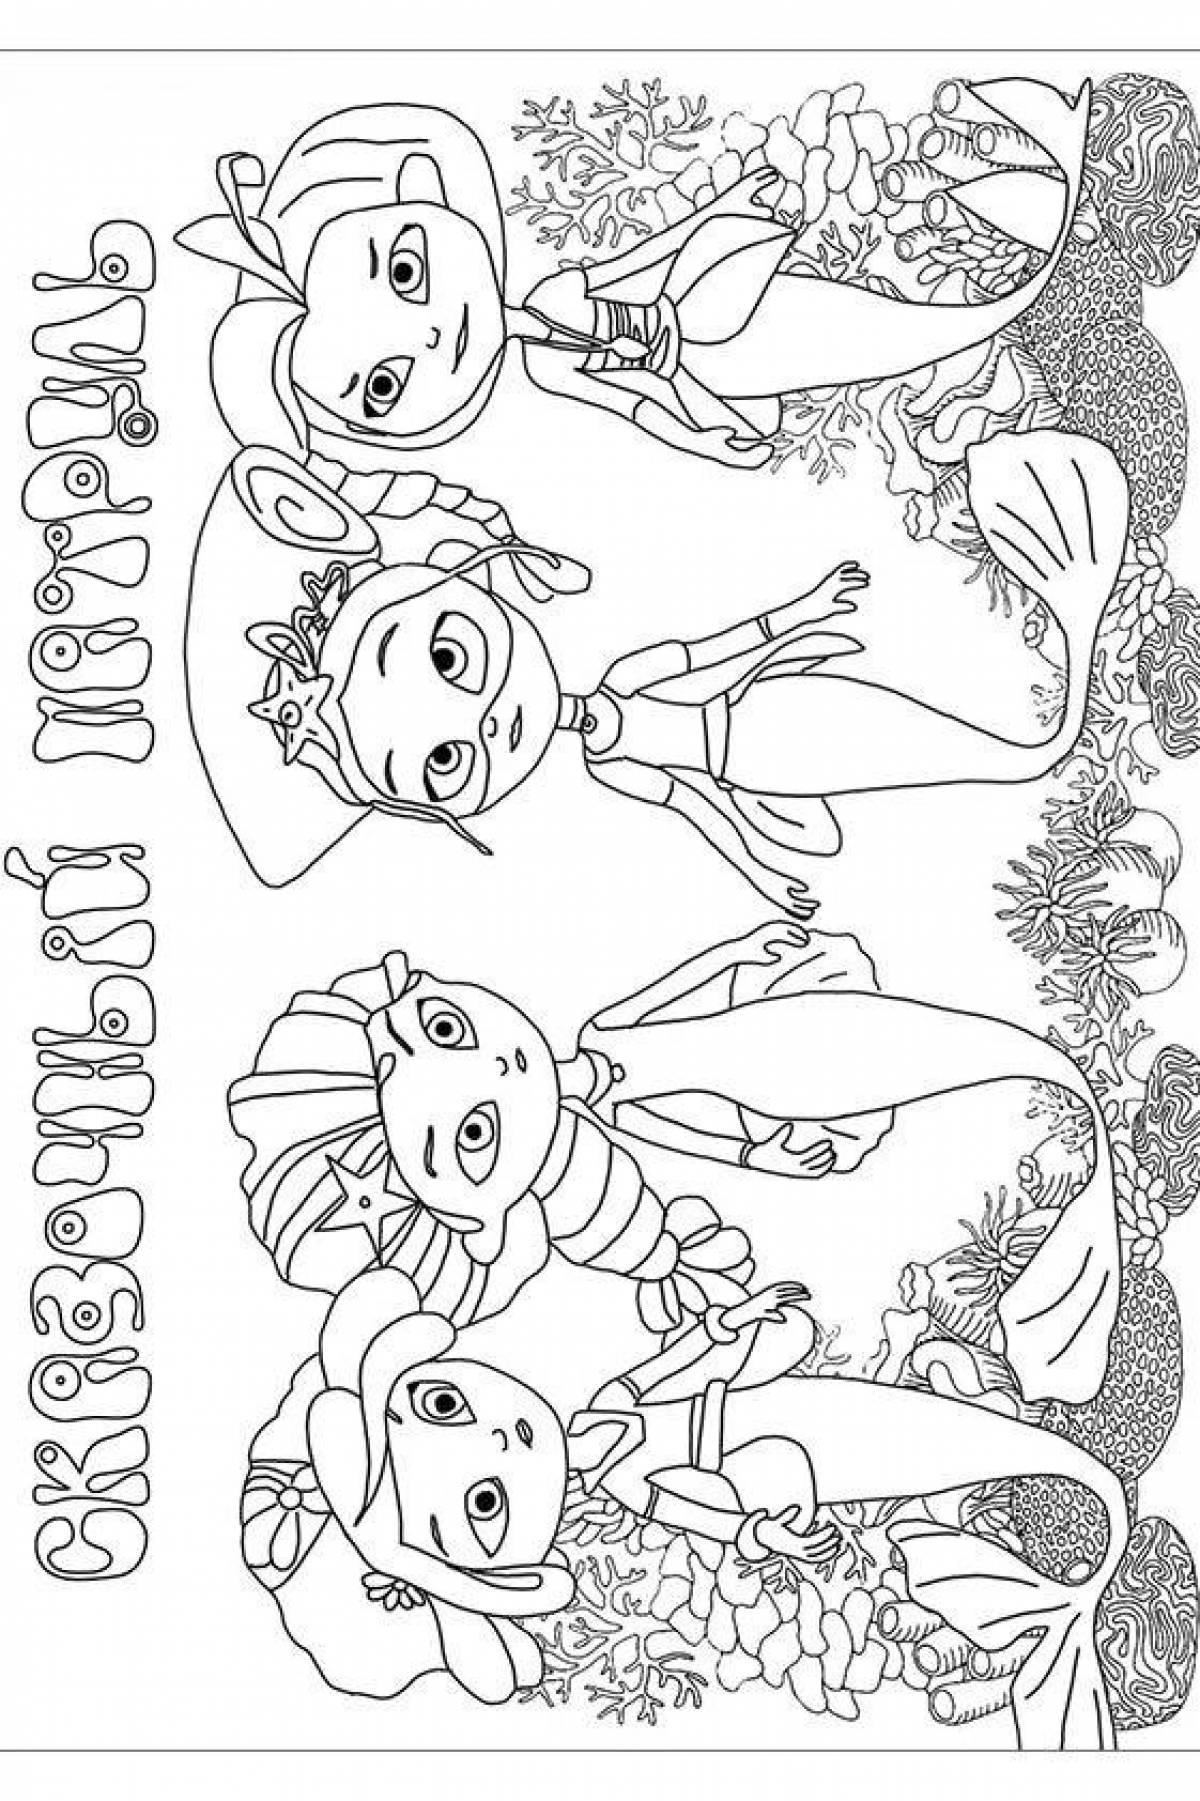 Awesome alice's fairy tale patrol coloring page